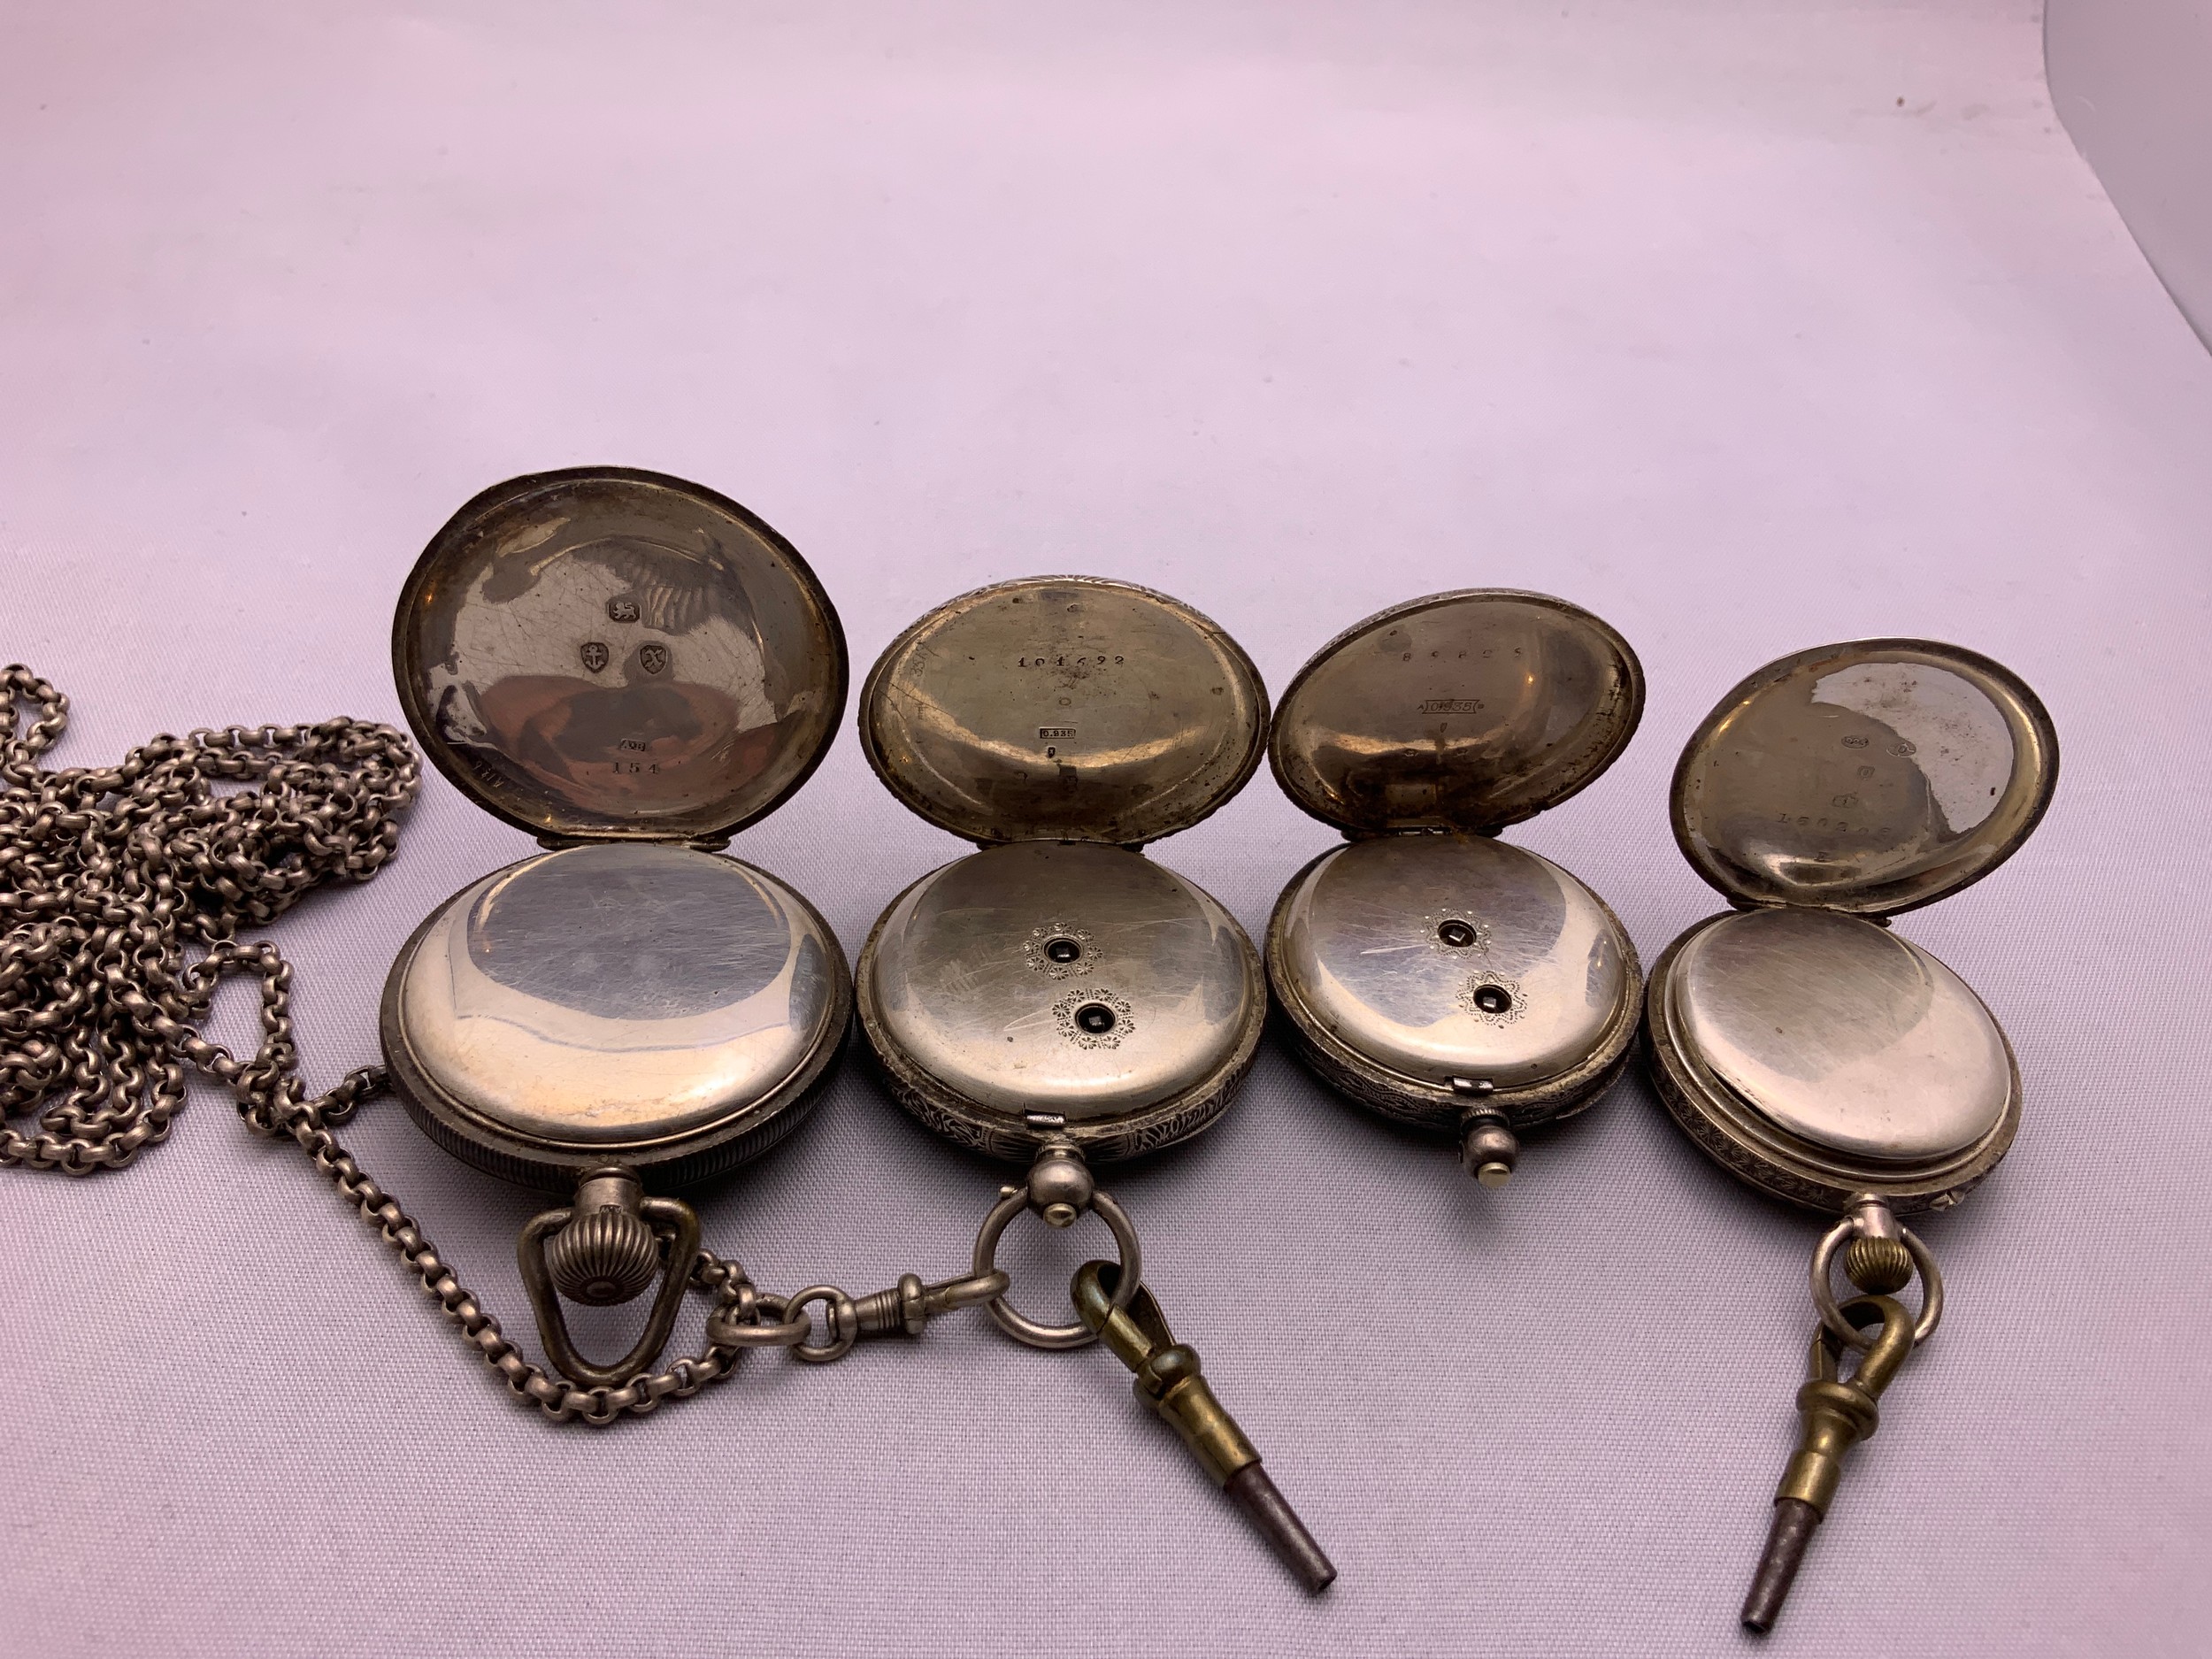 4x Silver Pocket Watches and Silver Chain - Image 3 of 3